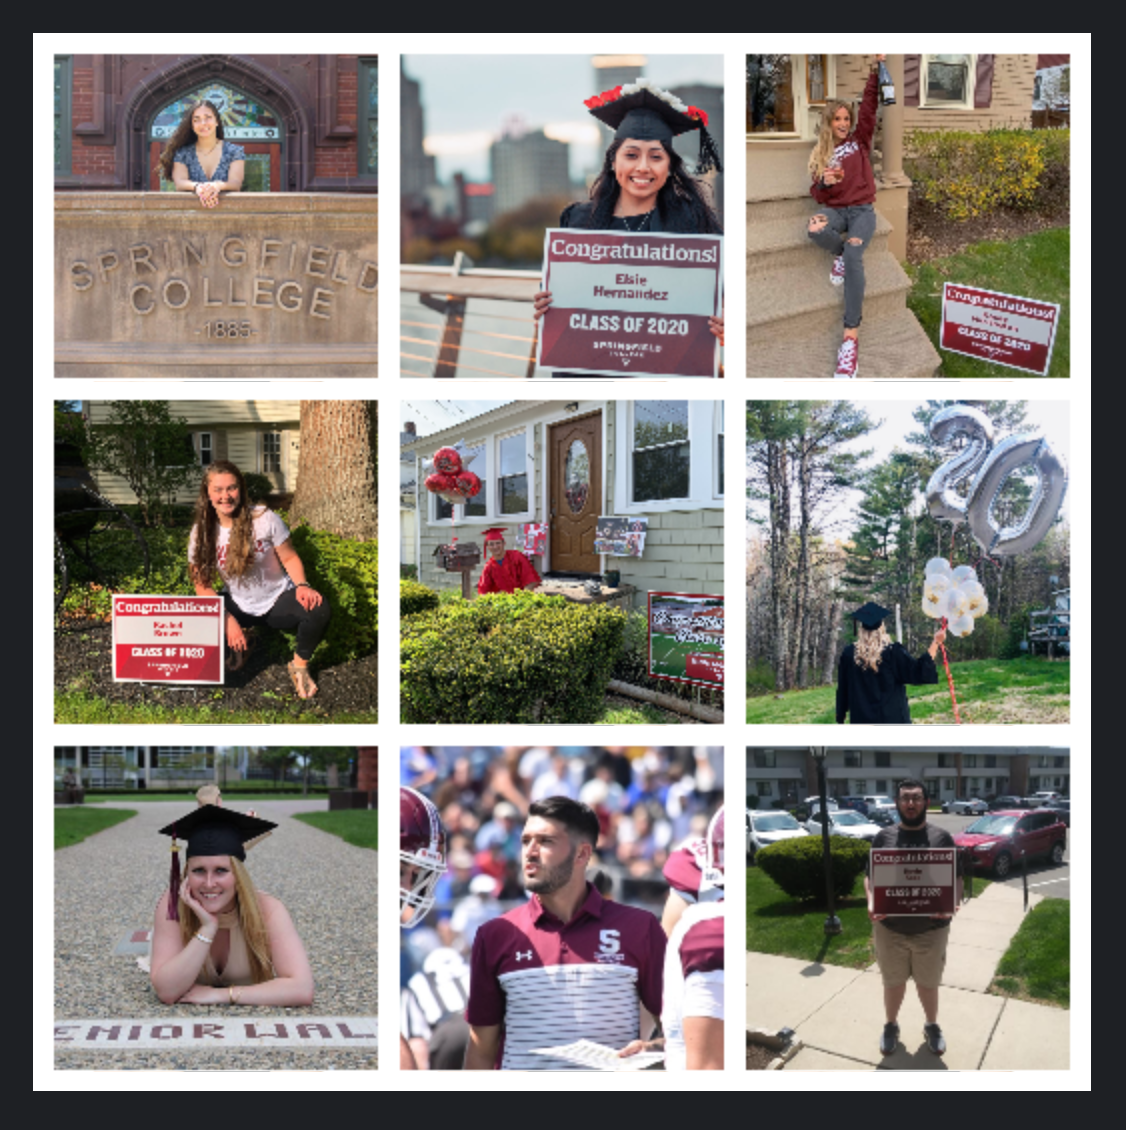 On Friday, May 15, the College celebrated senior week with the Social Media Challenge as the Class of 2020 was encouraged to submit their favorite Springfield College memory!